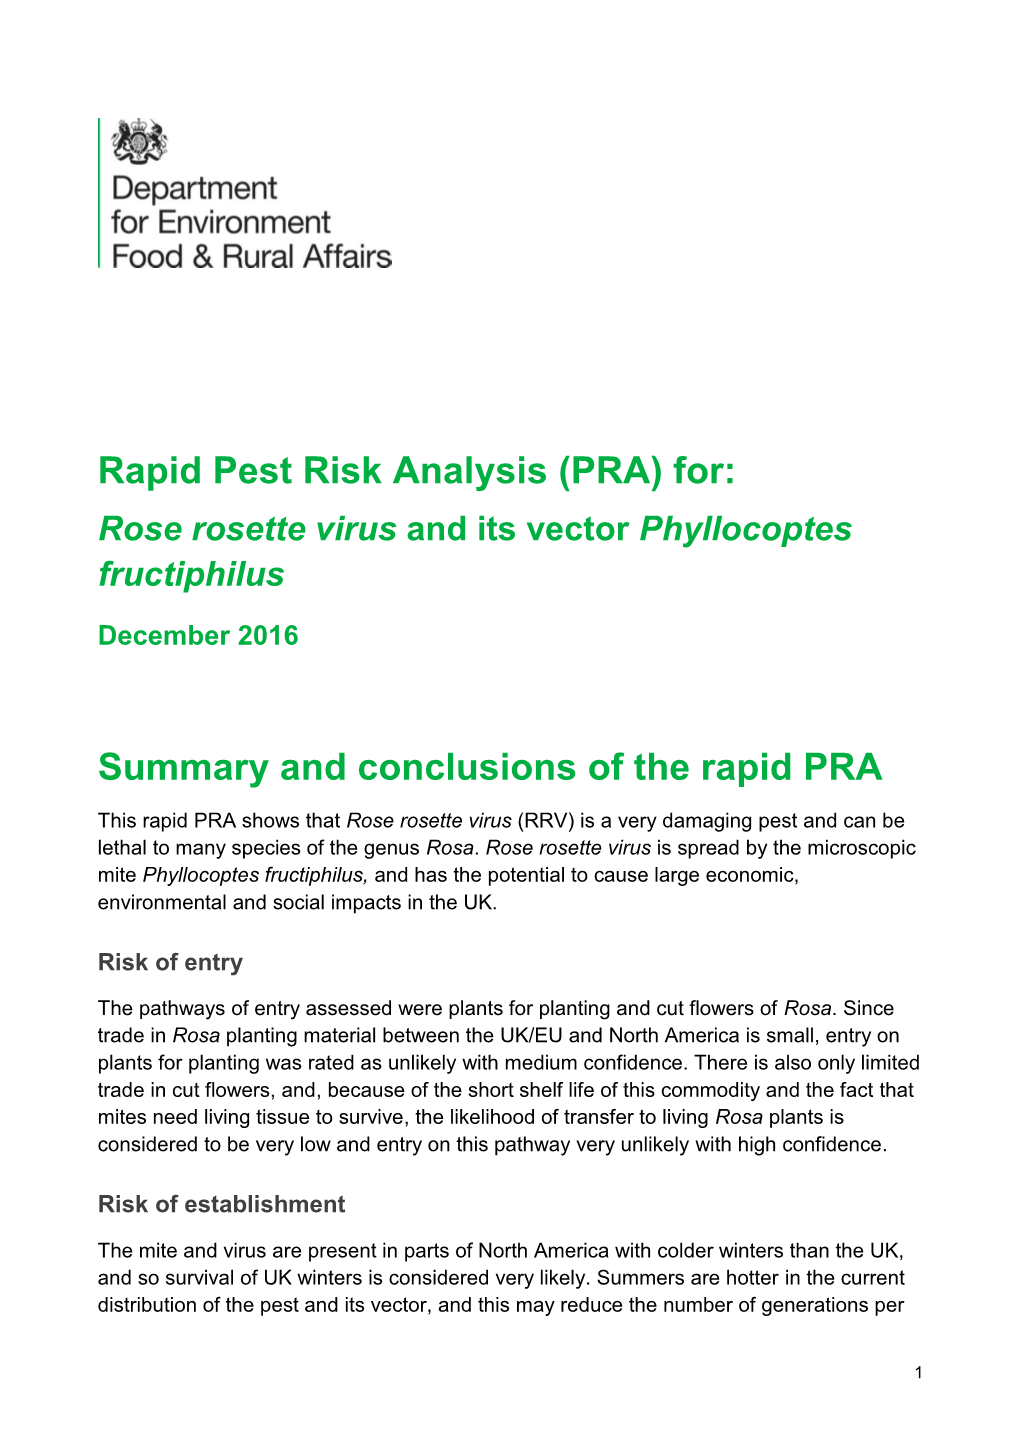 Rapid Pest Risk Analysis (PRA) For: Summary and Conclusions of the Rapid